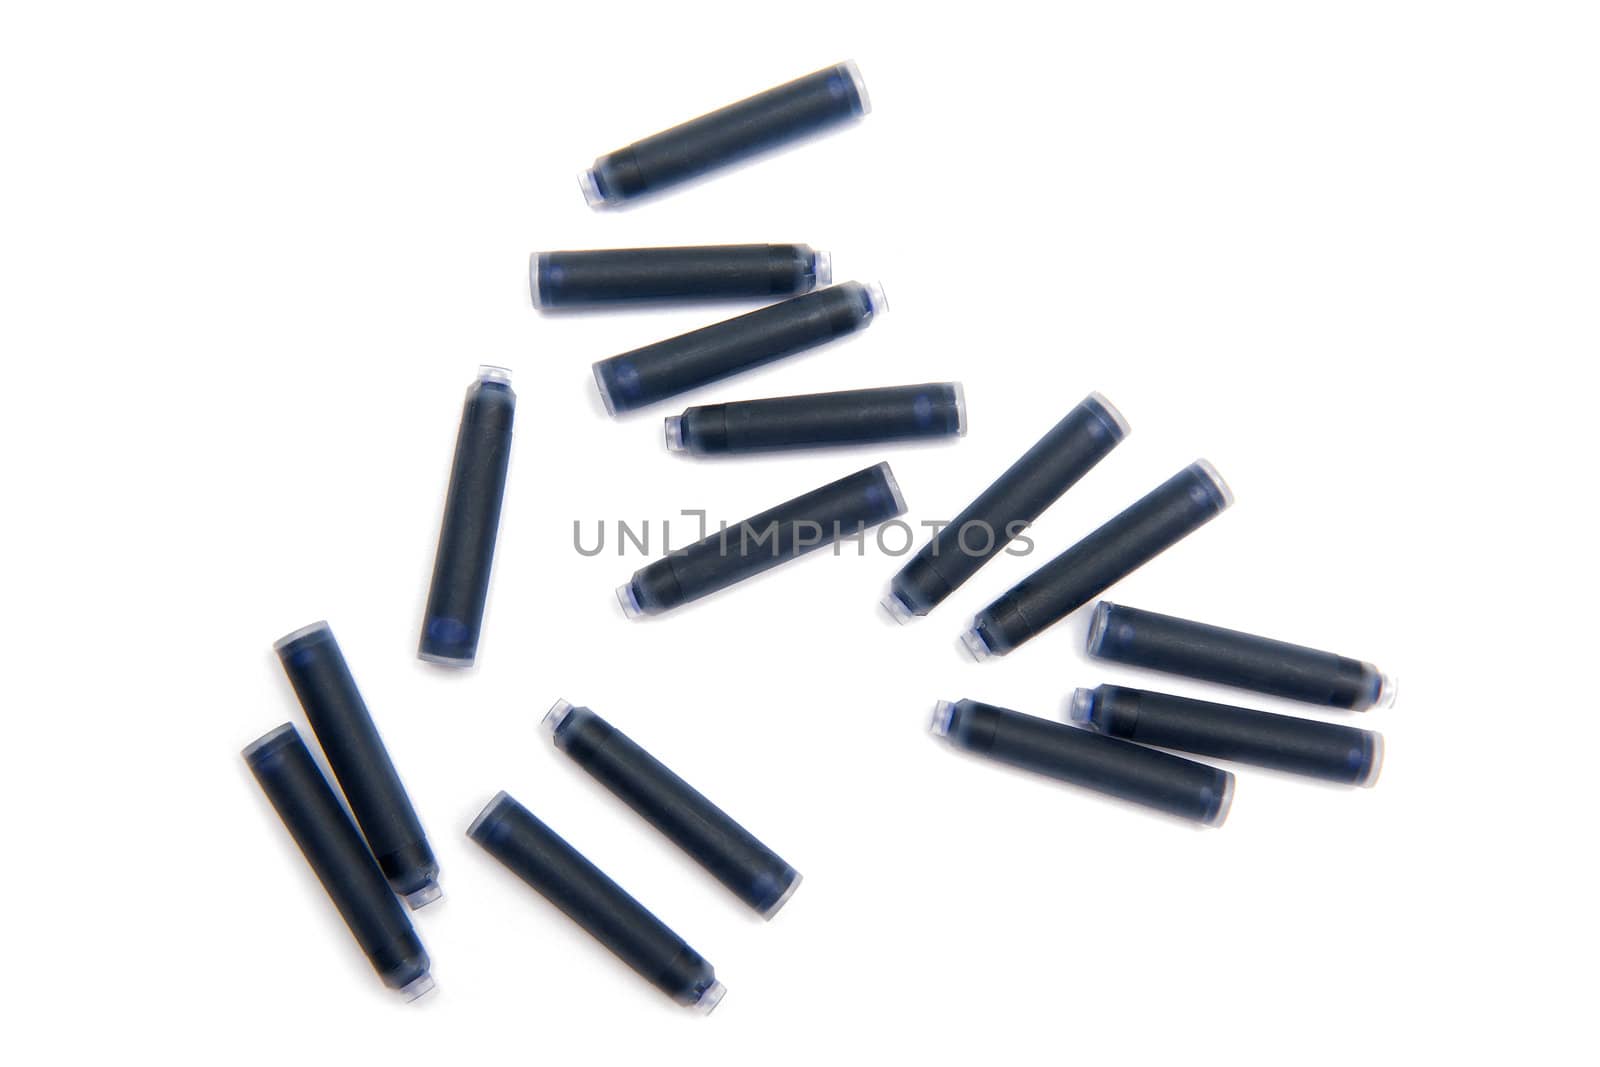 Pen cartridges isolated on the white background